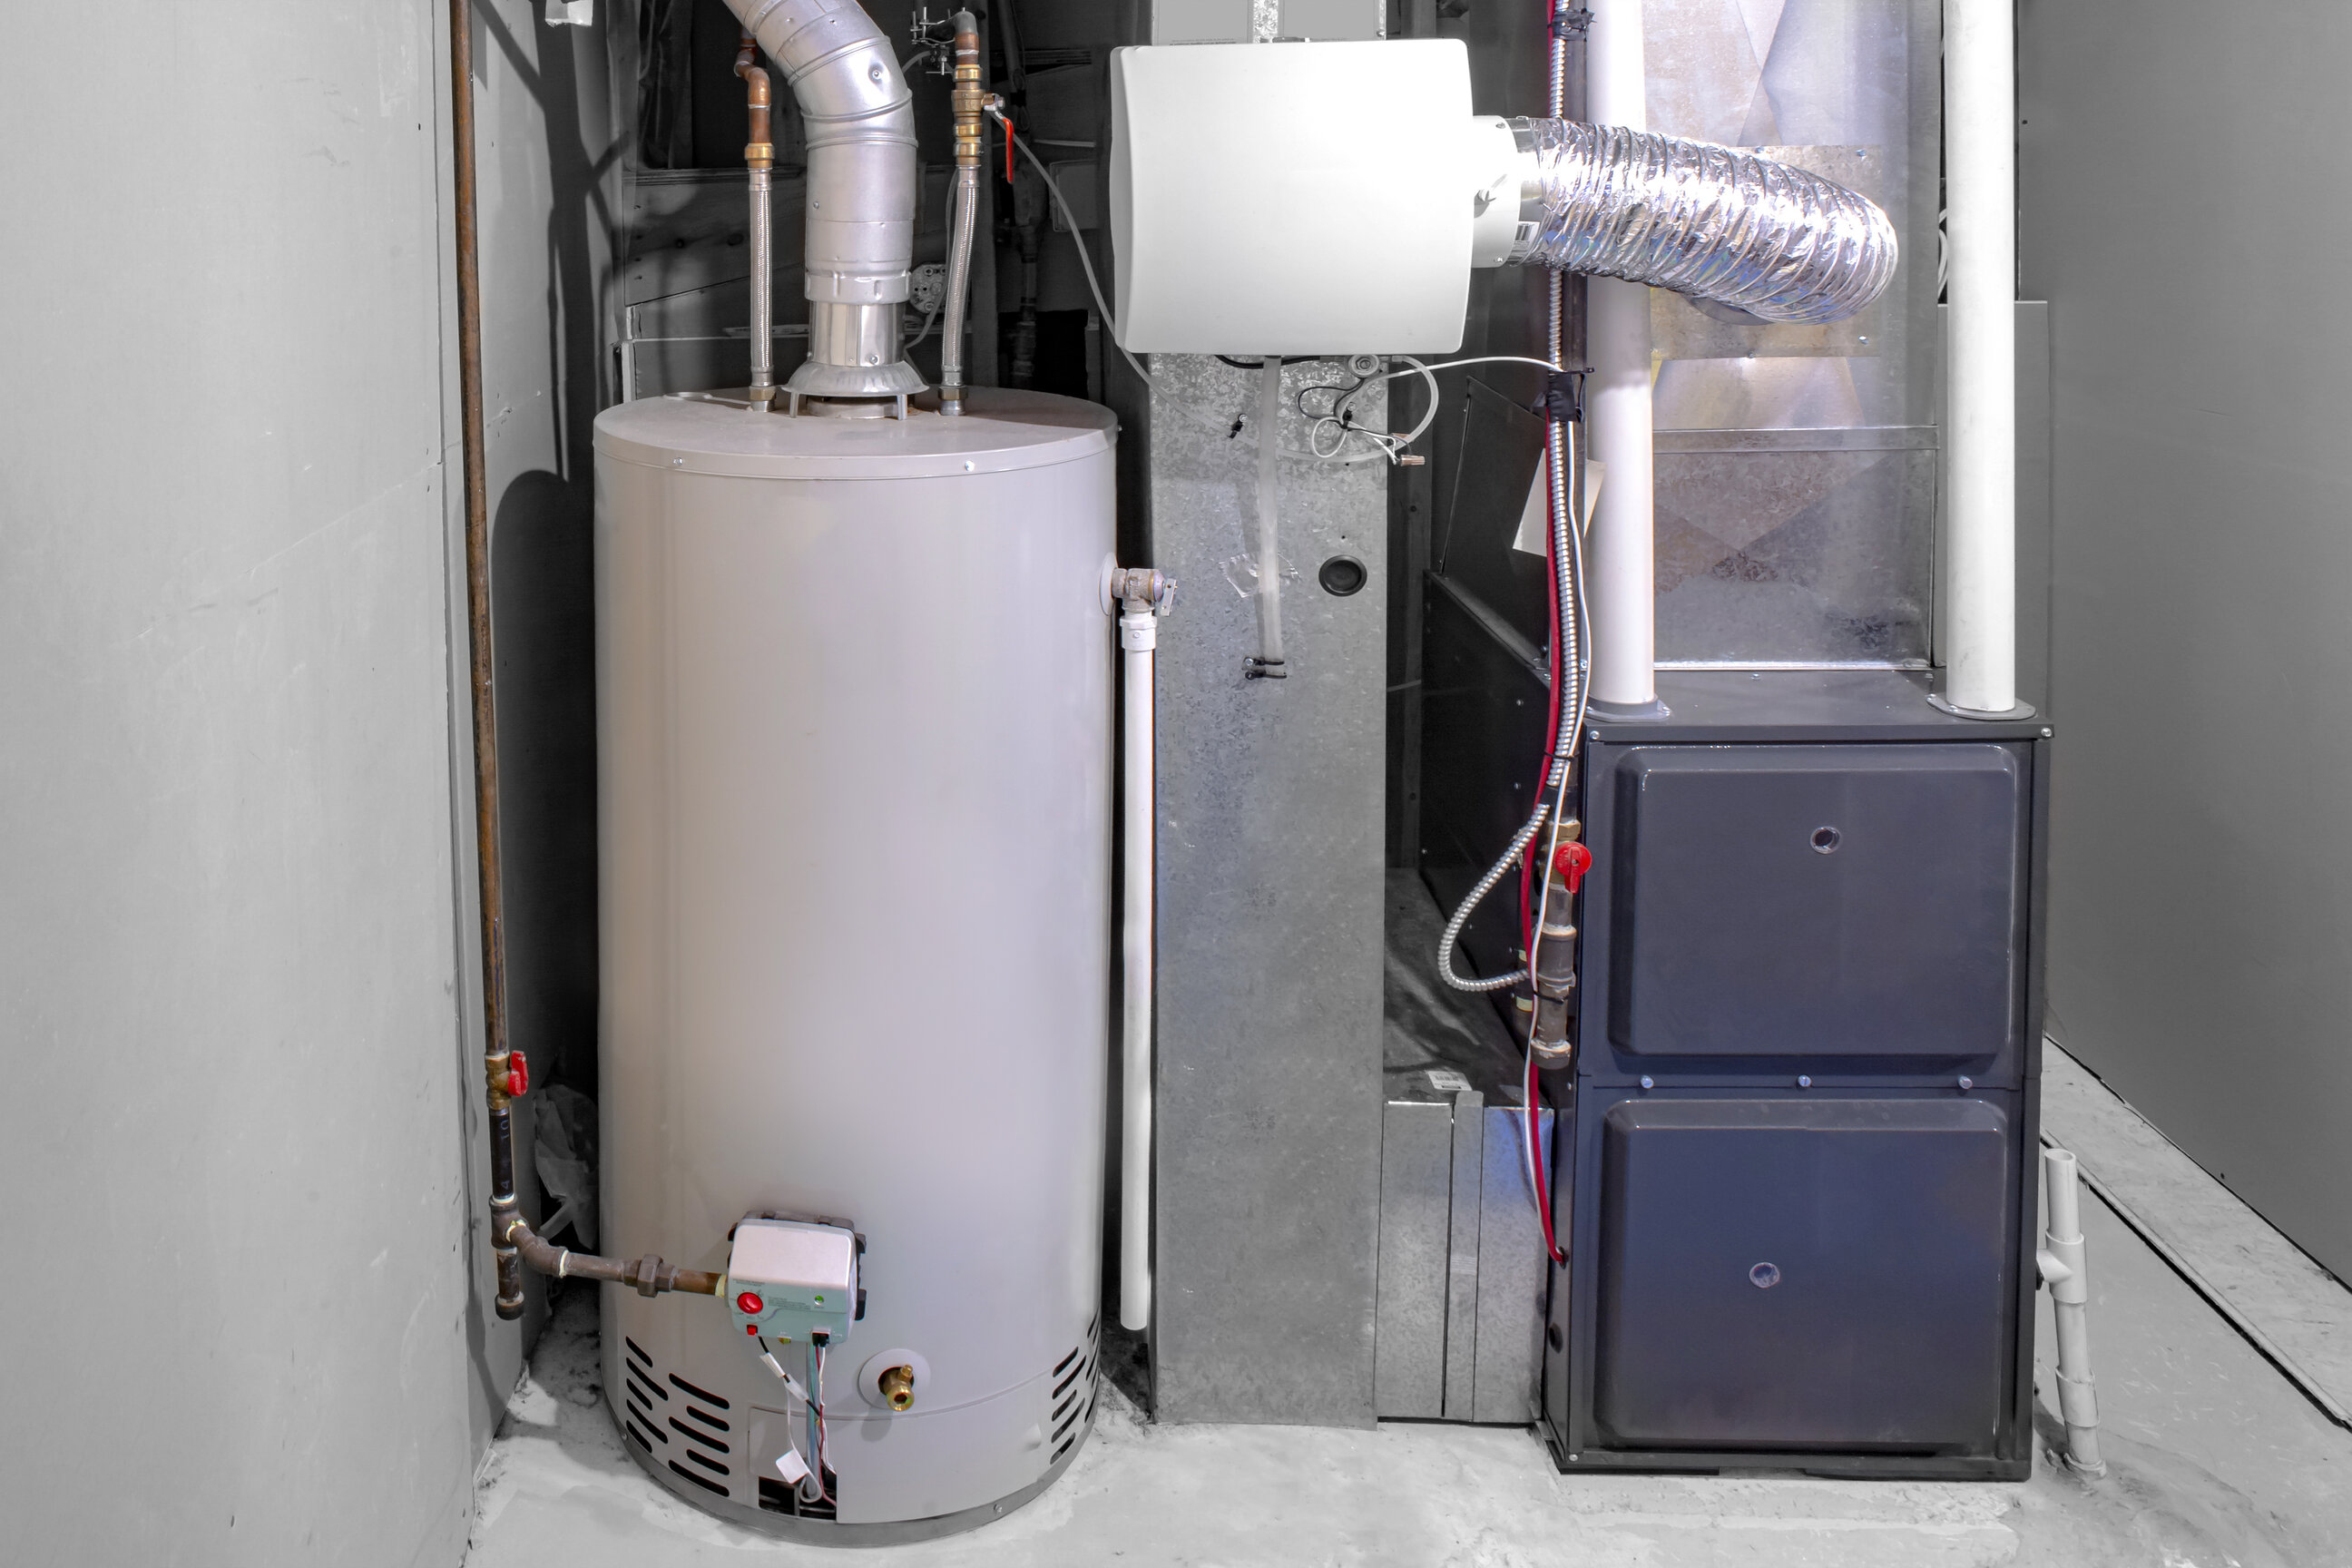 A gray furnace near a water heater and surrounded by other silver-colored home equipment in a gray room.